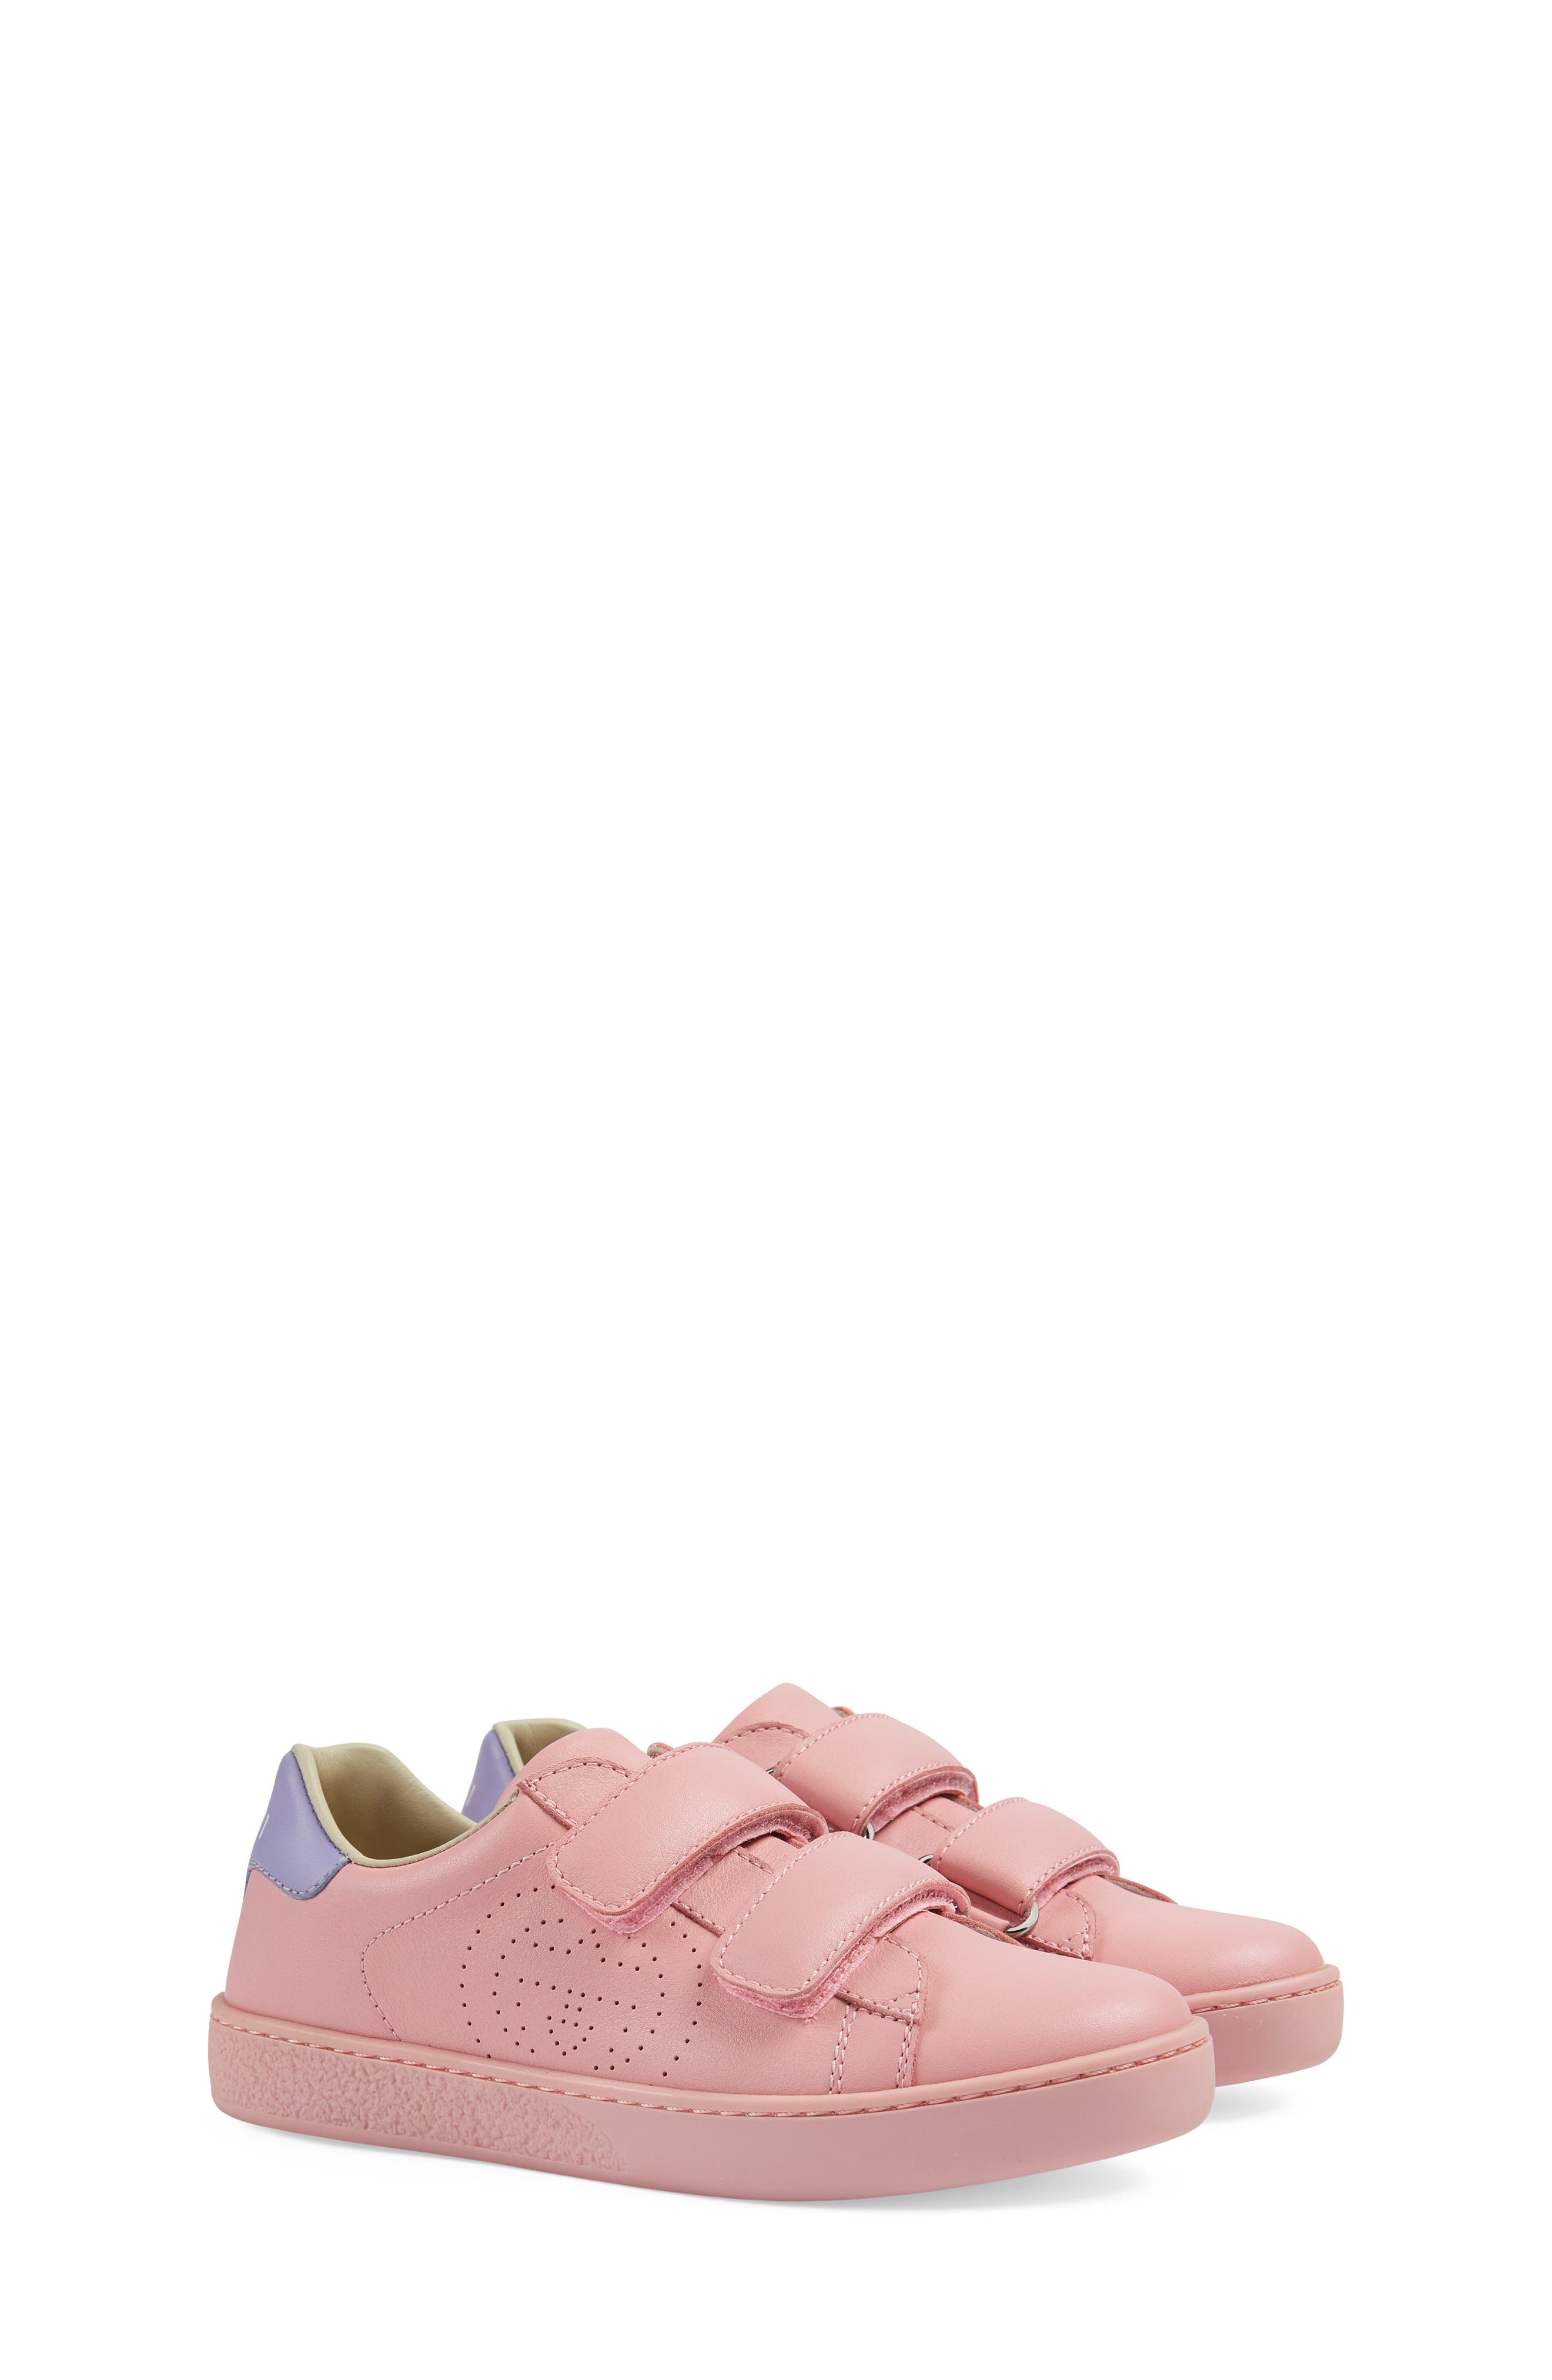 baby pink gucci shoes